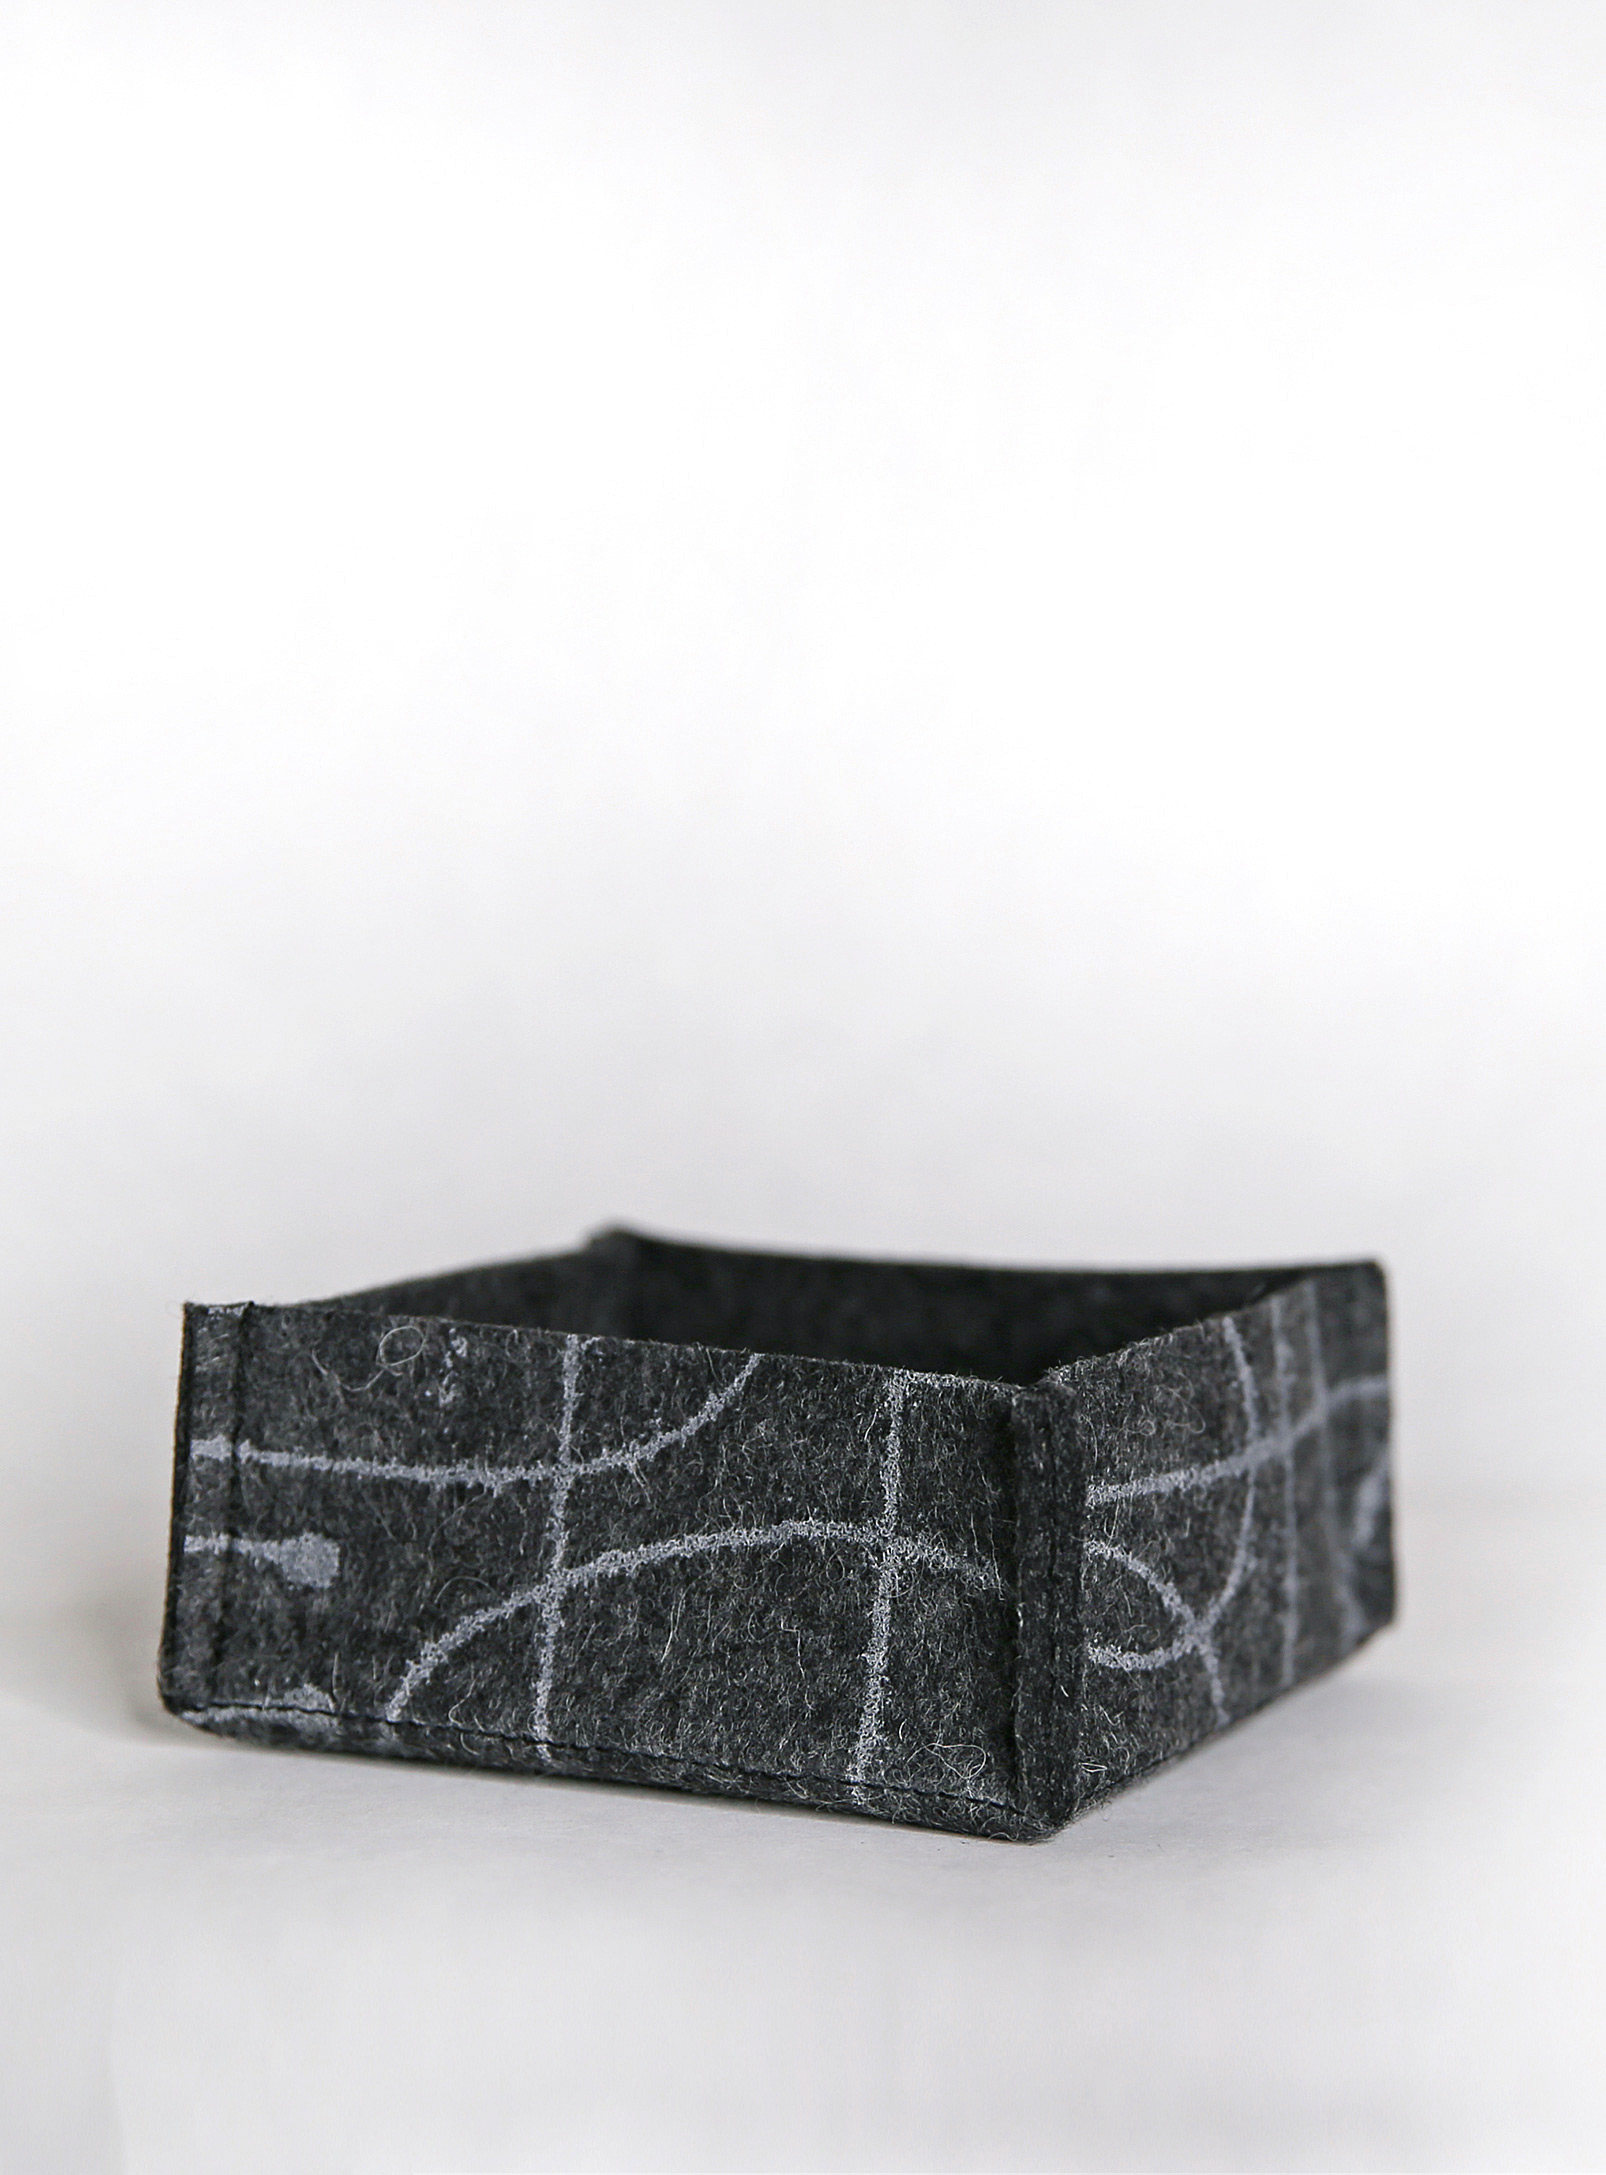 Lorraine Tuson Graphic Merino Wool Felt Storage Box See Available Sizes In Charcoal